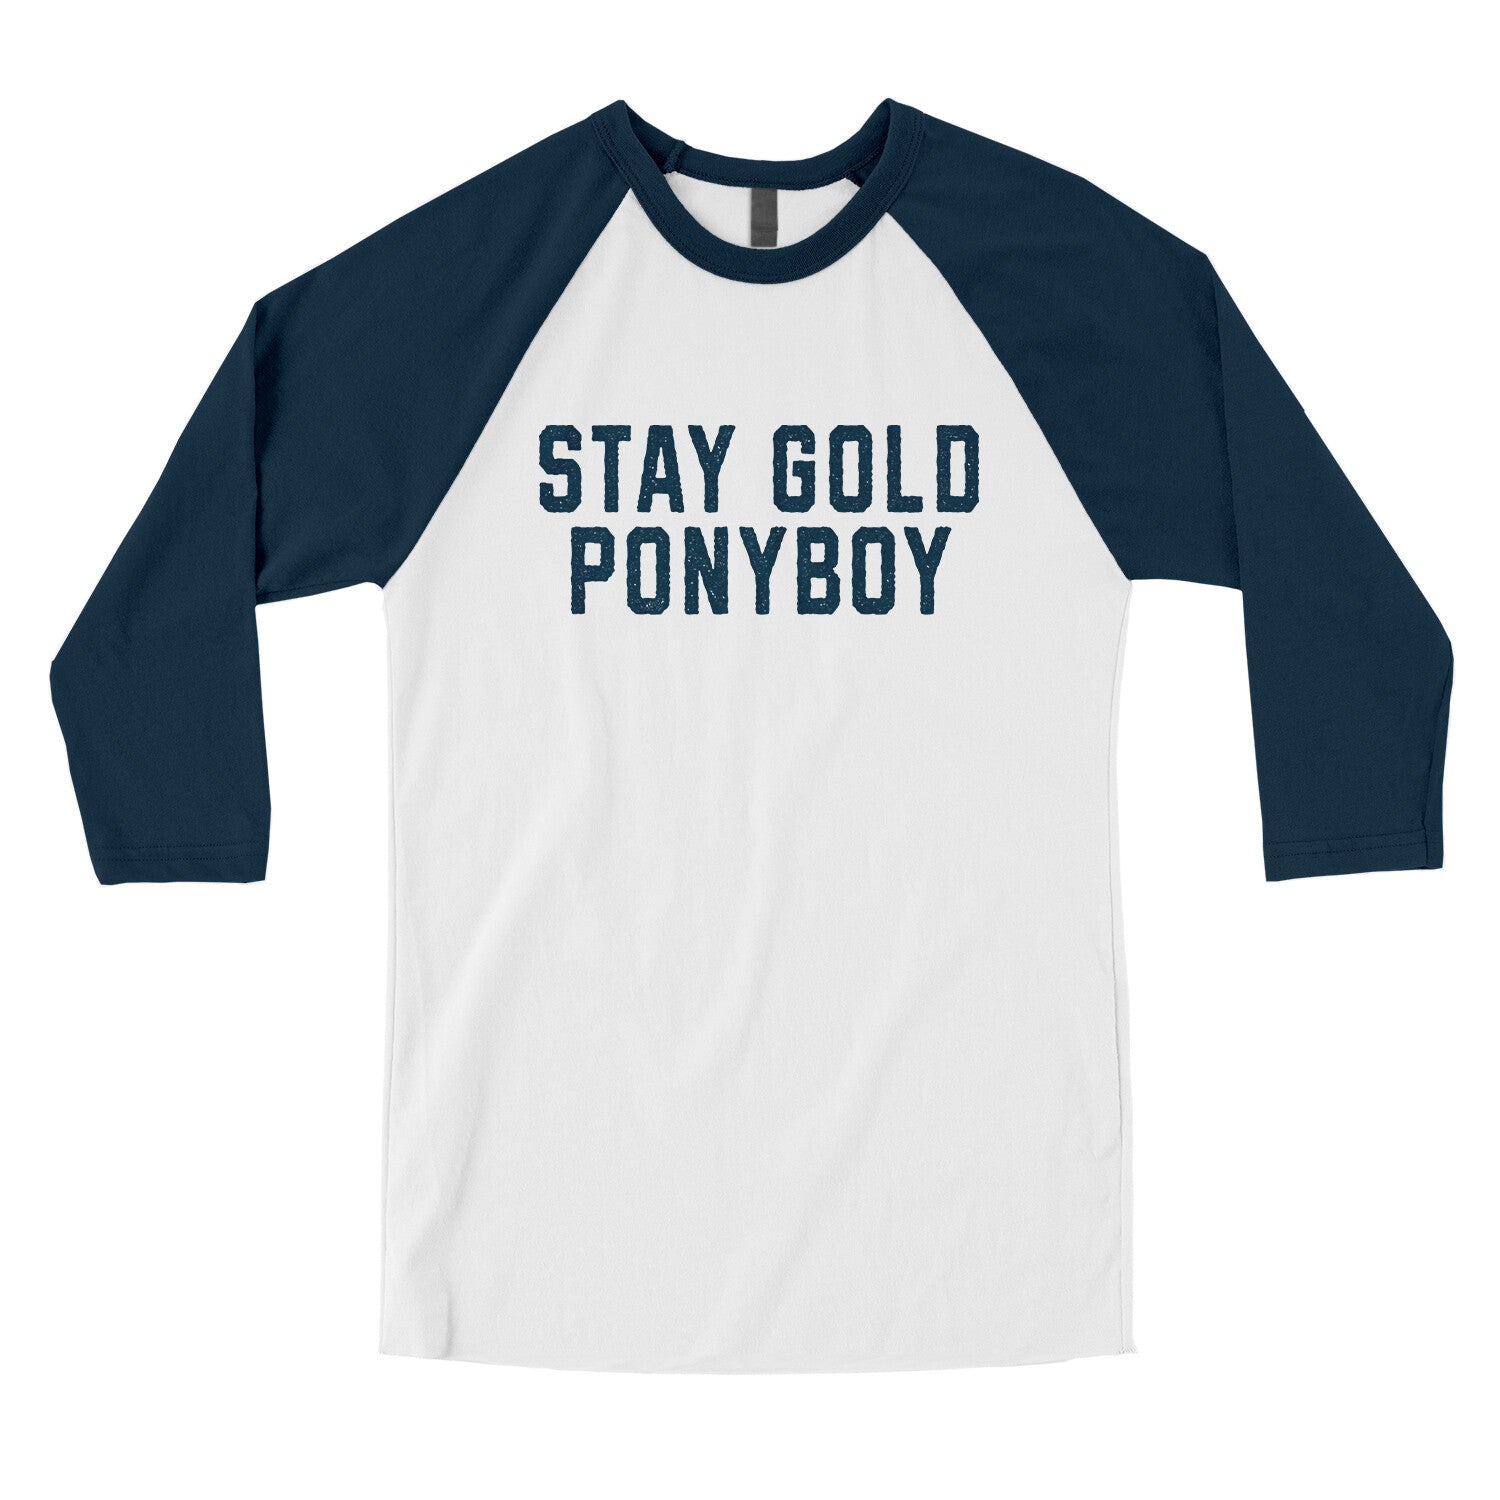 Stay Gold Ponyboy in White with Navy Color